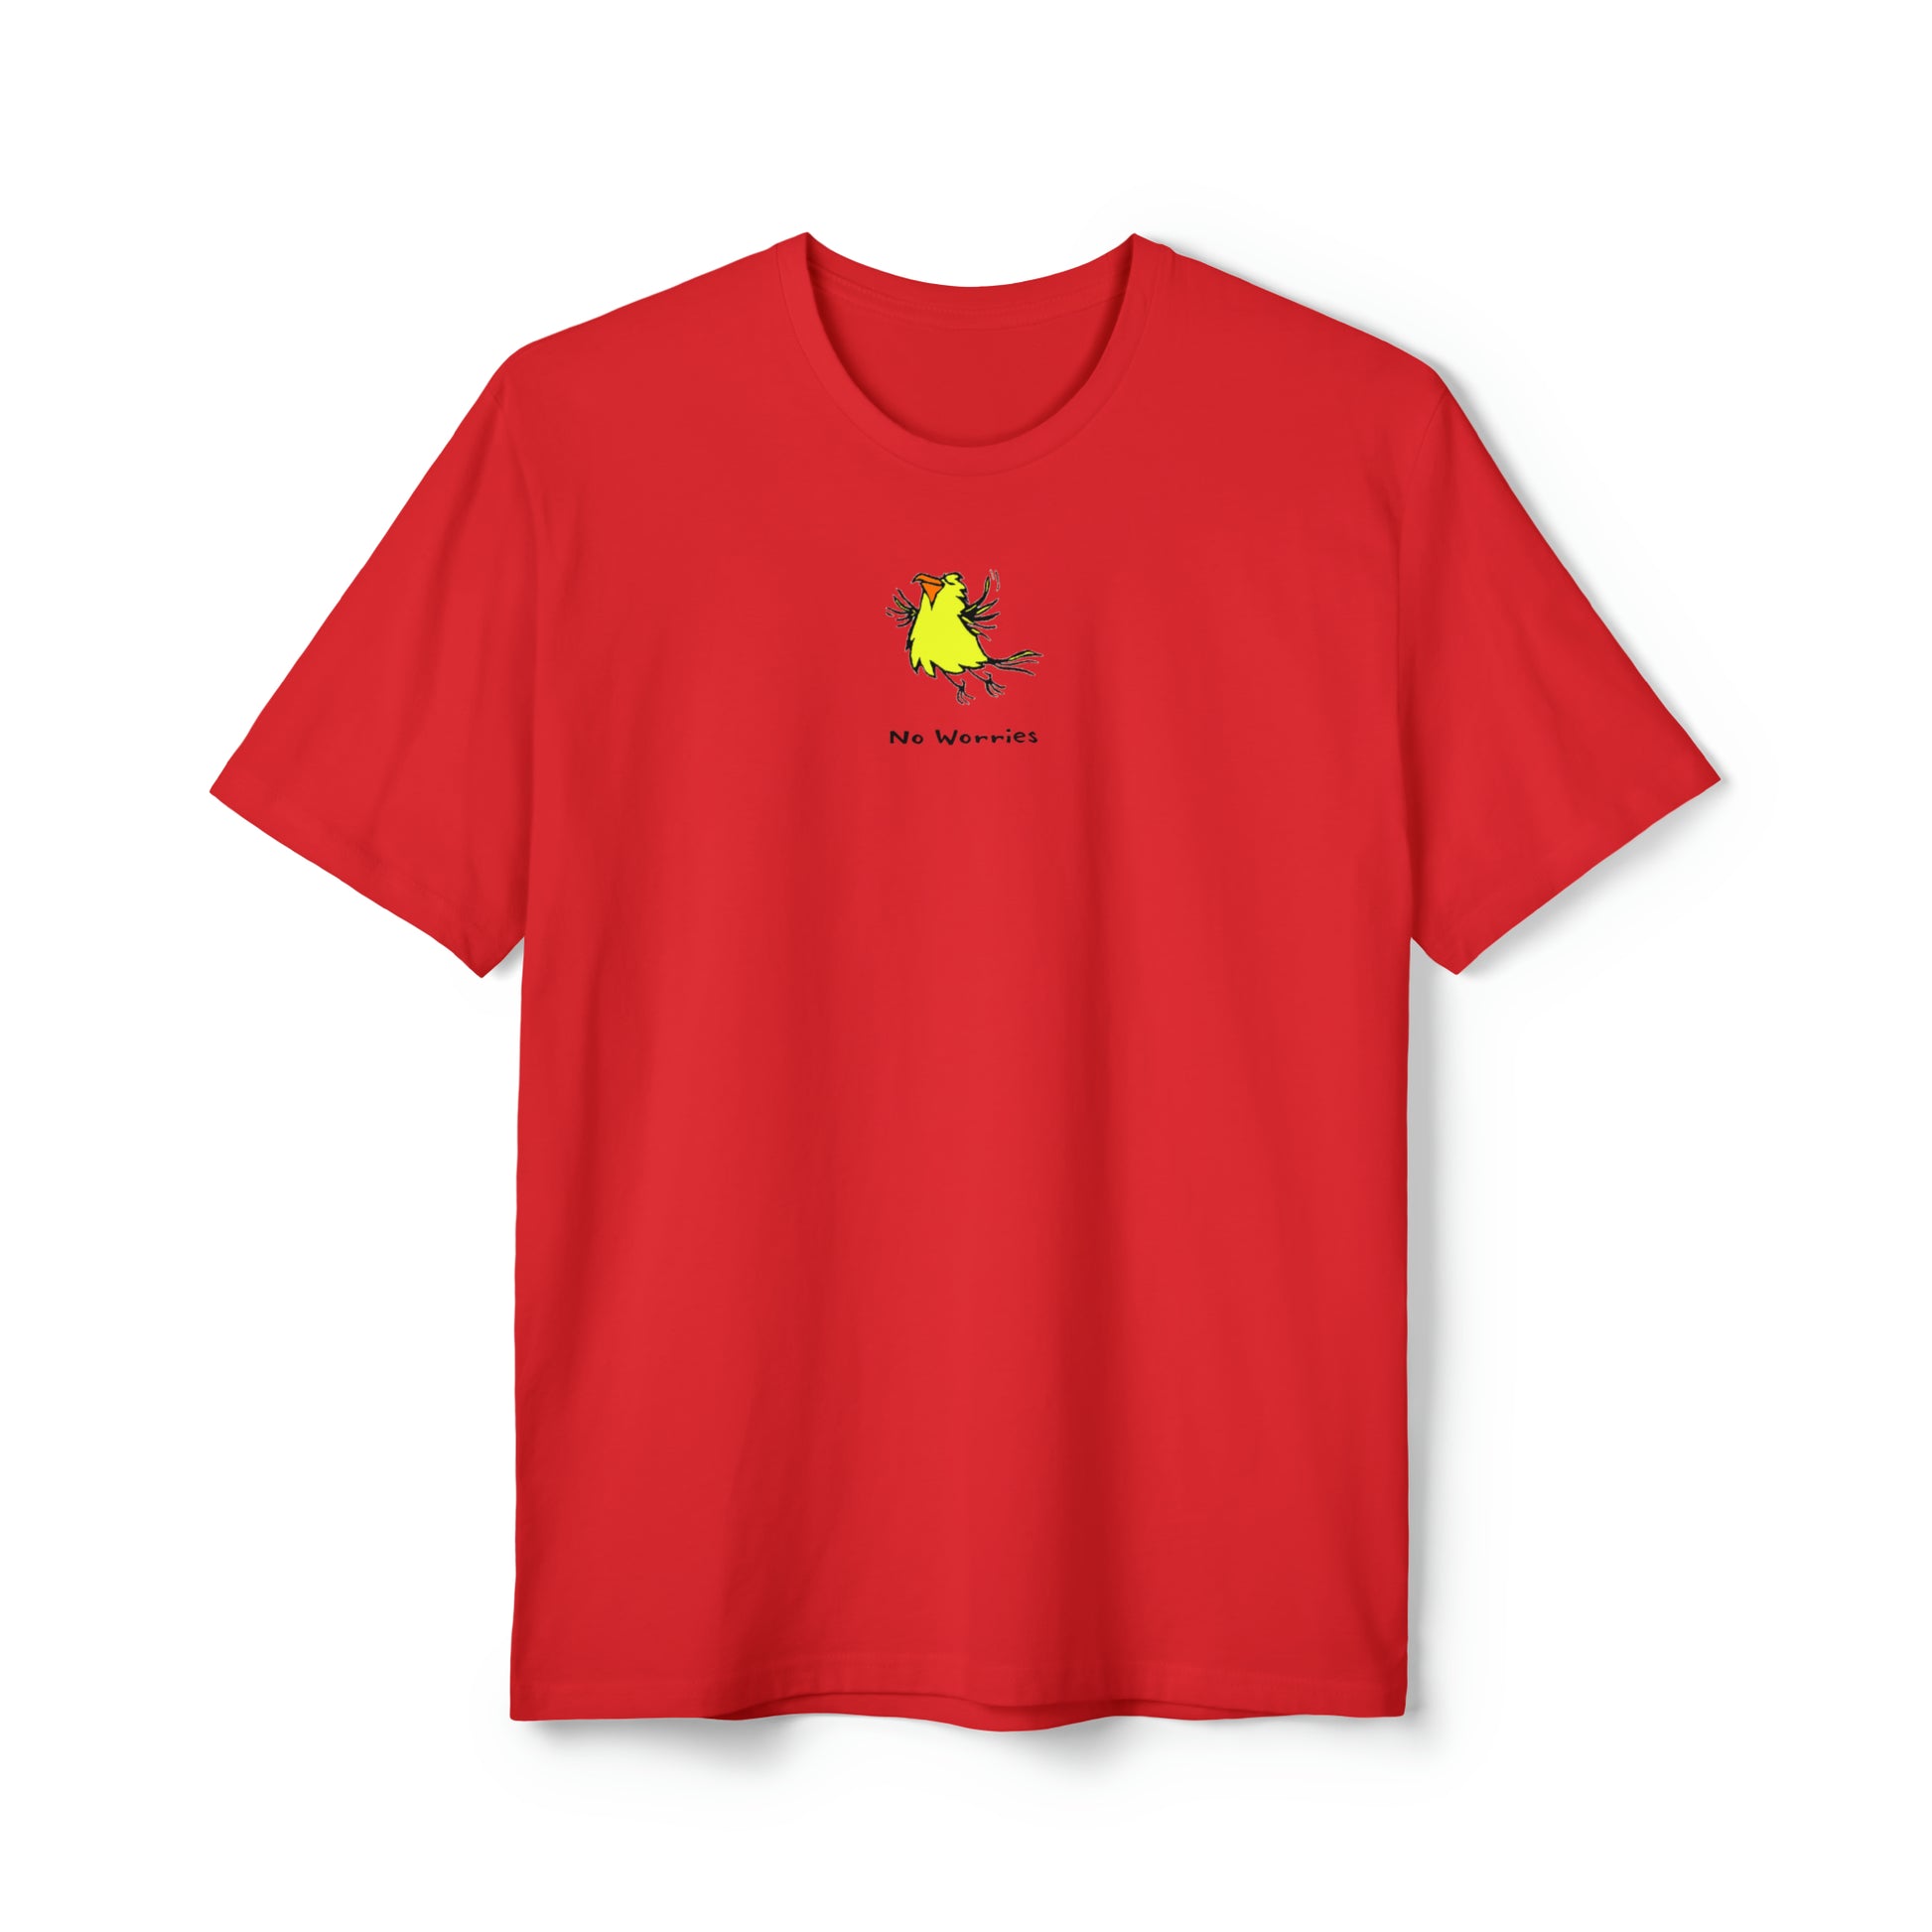 Yellow flying bird with orange beak on ruby red color recycled unisex men's t-shirt. Text under image says No Worries